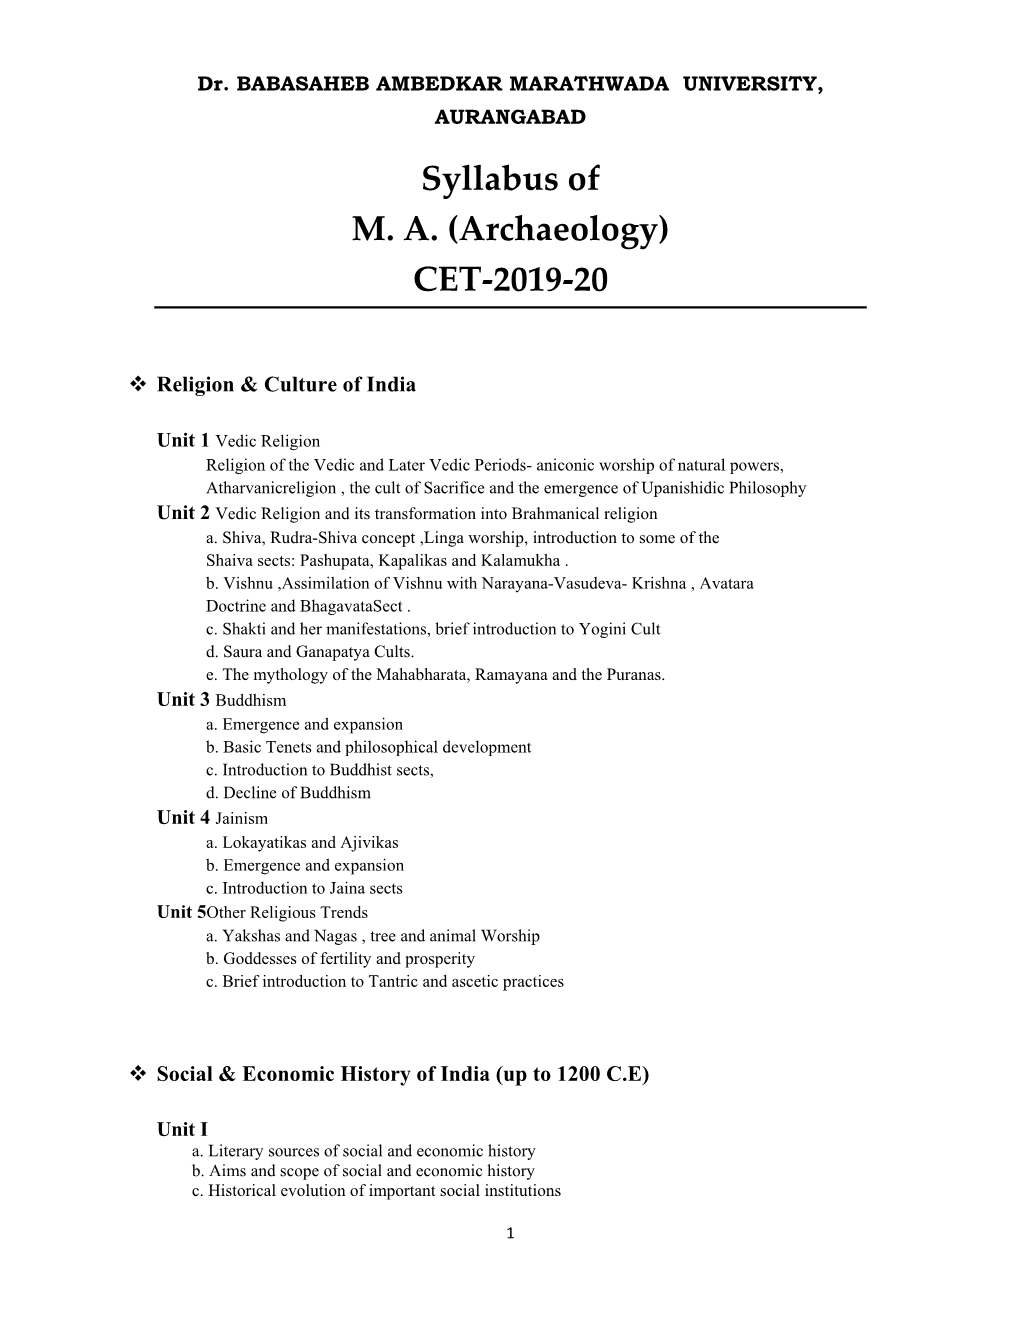 Syllabus of M. A. (Archaeology) CET-2019-20